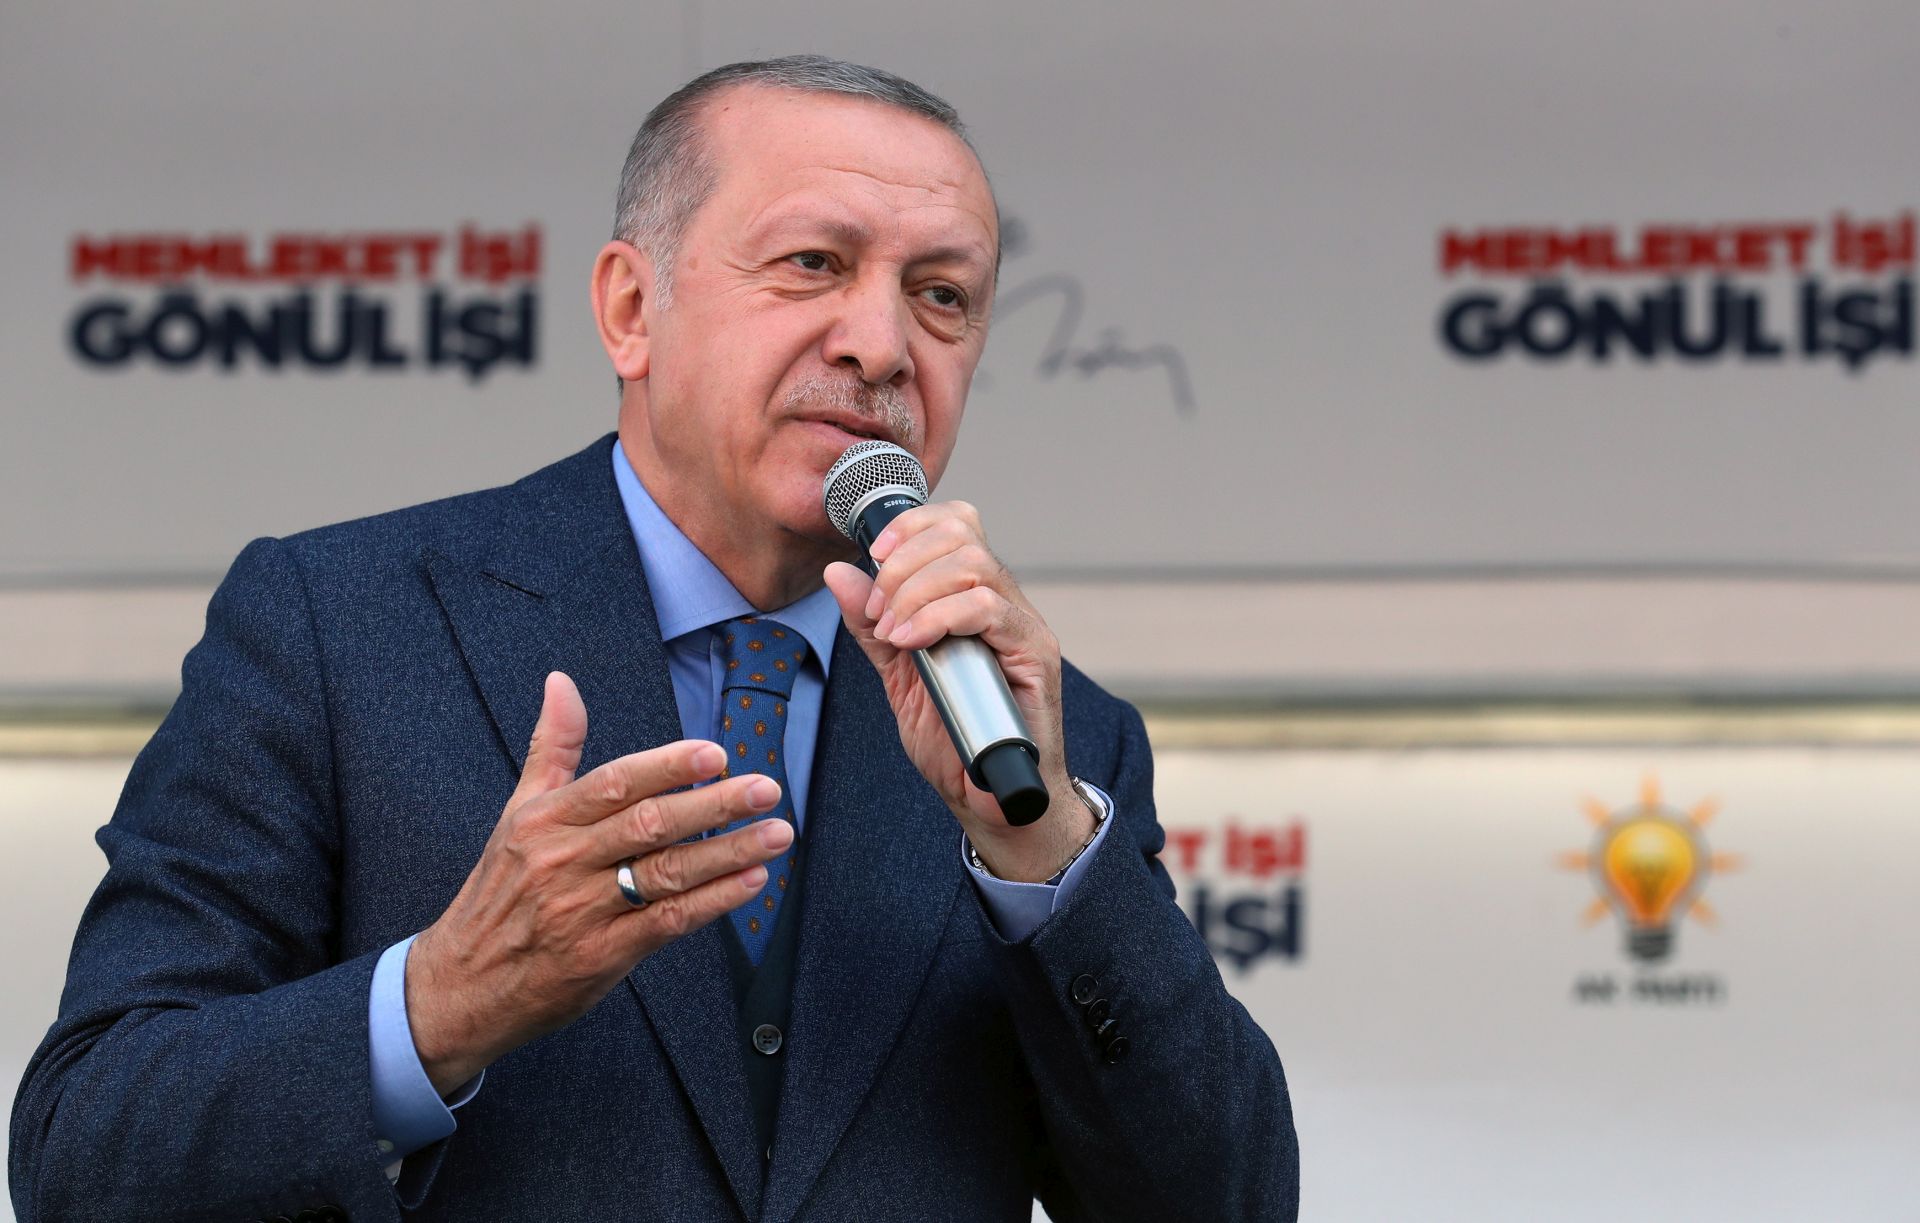 epa07441967 A handout photo made available by the Turkish President Press office shows Turkish President Recep Tayyip Erdogan speaking during his Justice and Development Party (AK Party) local election campaign rally in Tekirdag, Turkey, 16 March 2019. Local elections in Turkey's capital and the country's overall 81 provinces are scheduled for 31 March 2019.  EPA/TURKISH PRESIDENT PRESS OFFICE / HANDOUT  HANDOUT EDITORIAL USE ONLY/NO SALES